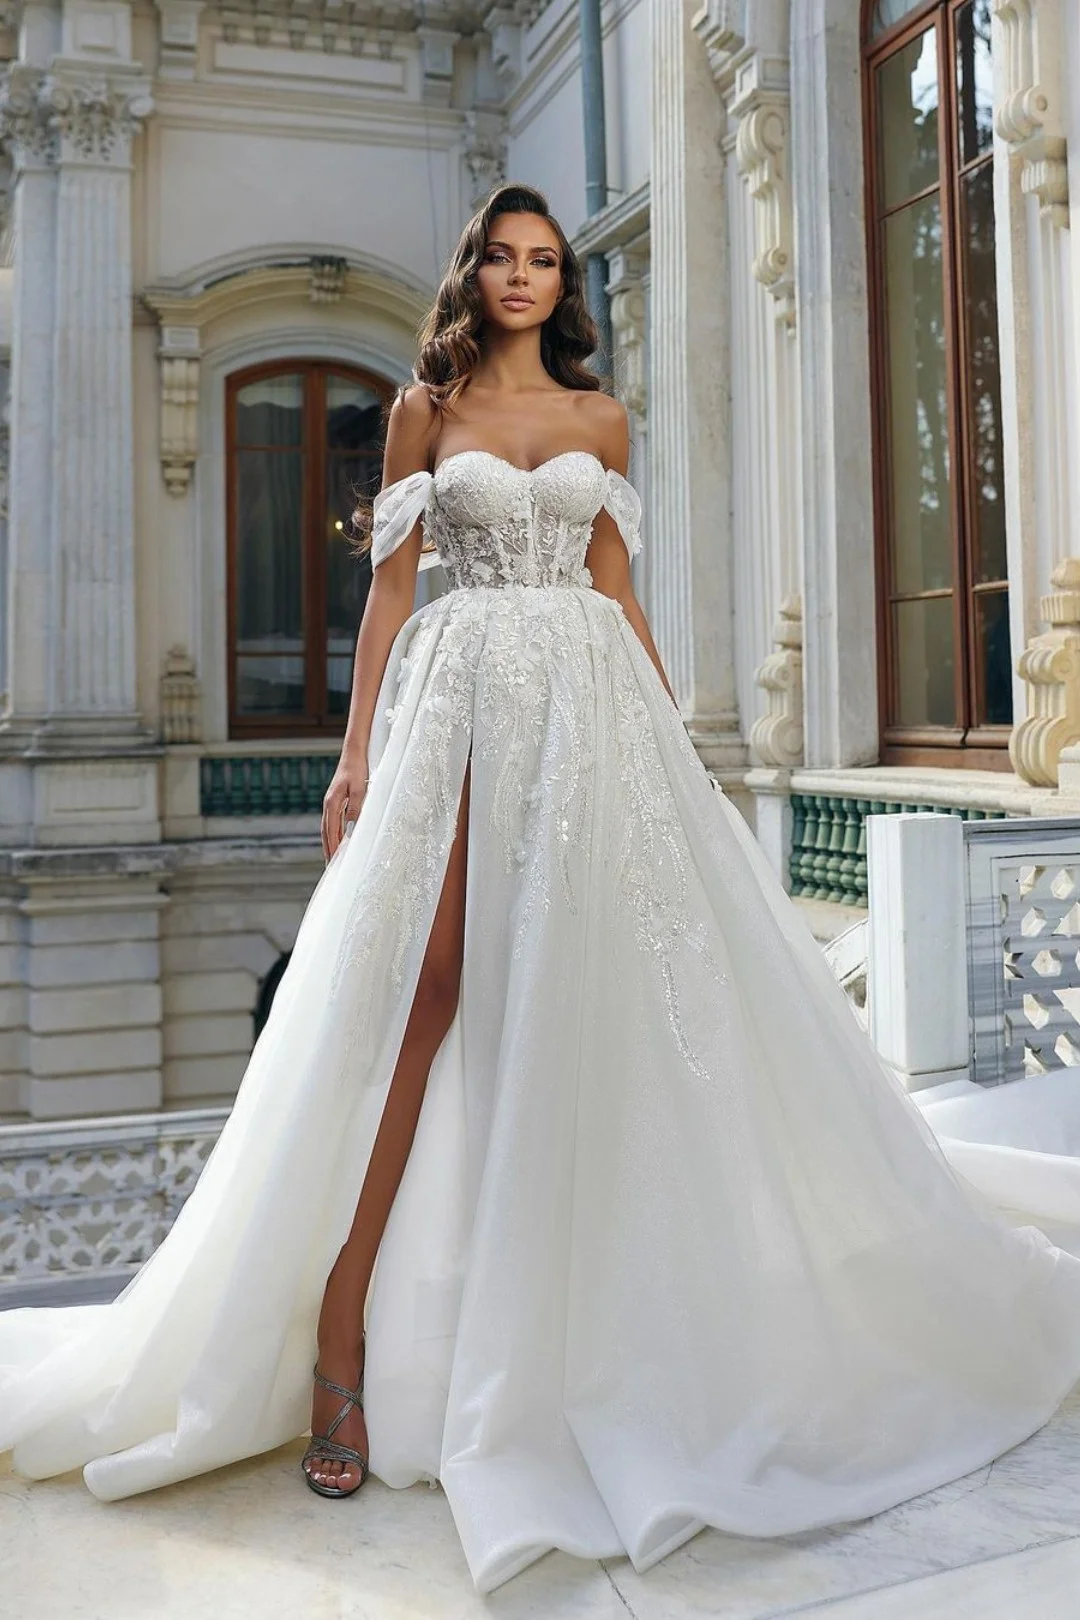 Lace White Wedding Dress Off-the-shoulder With High Slit Sleeveless YL0254